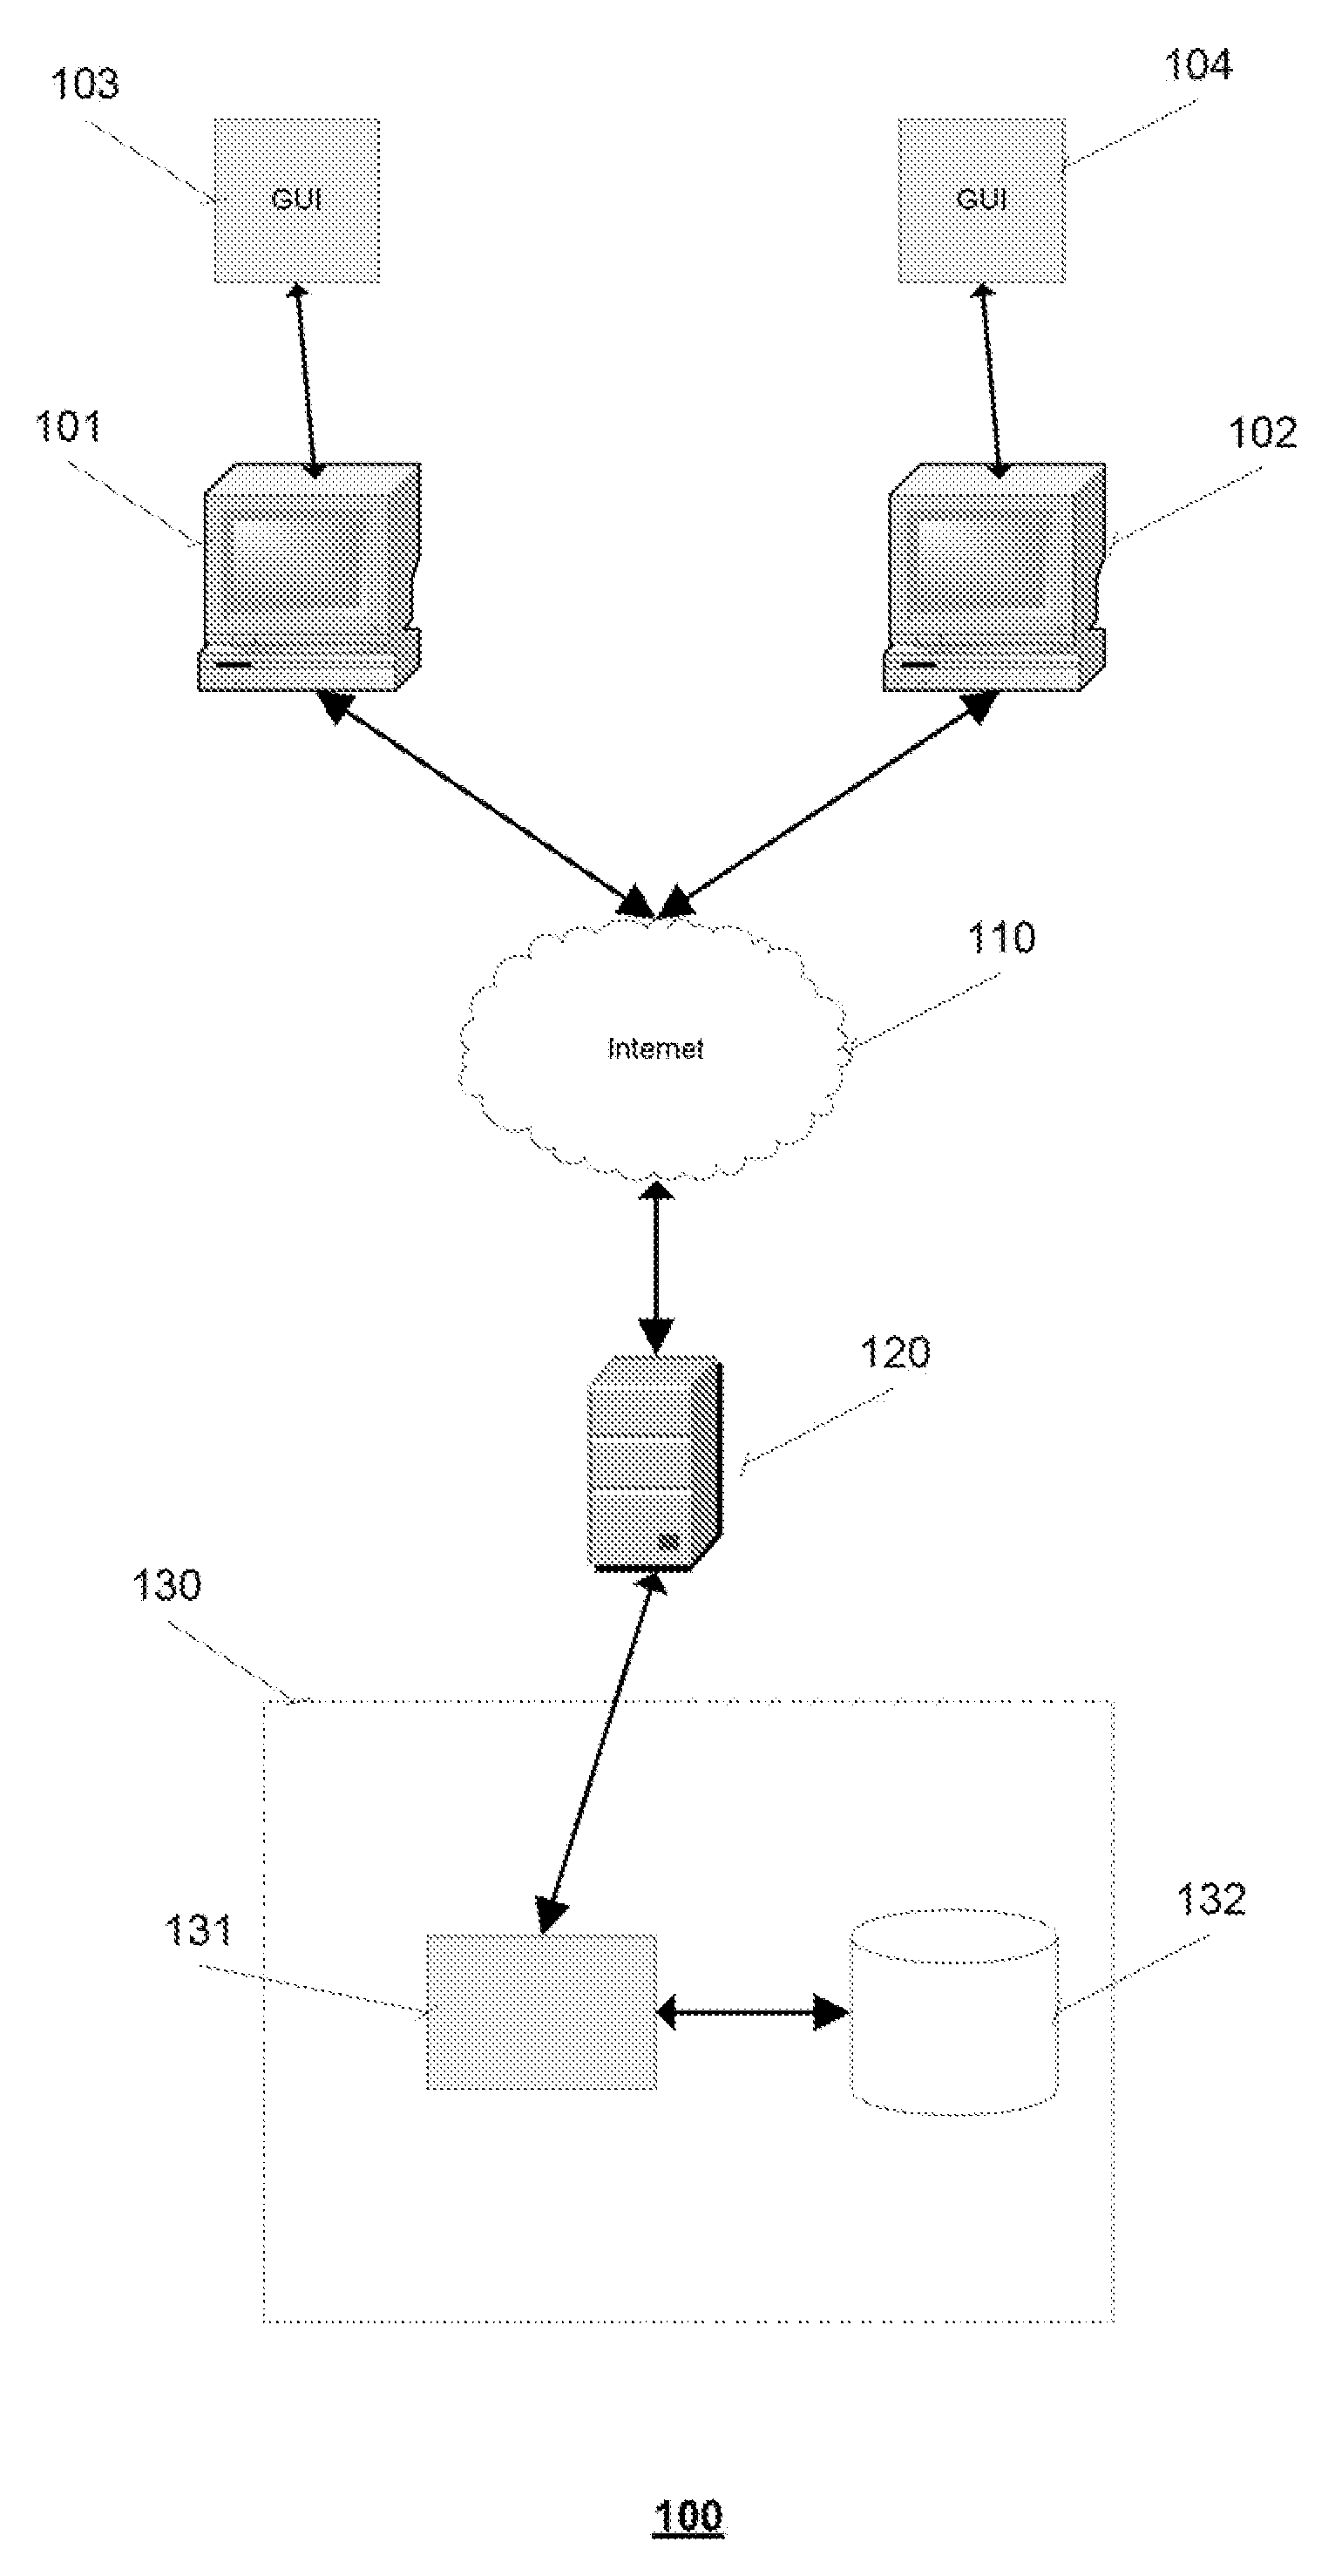 Method for early career services for communicating with a web based database and social network